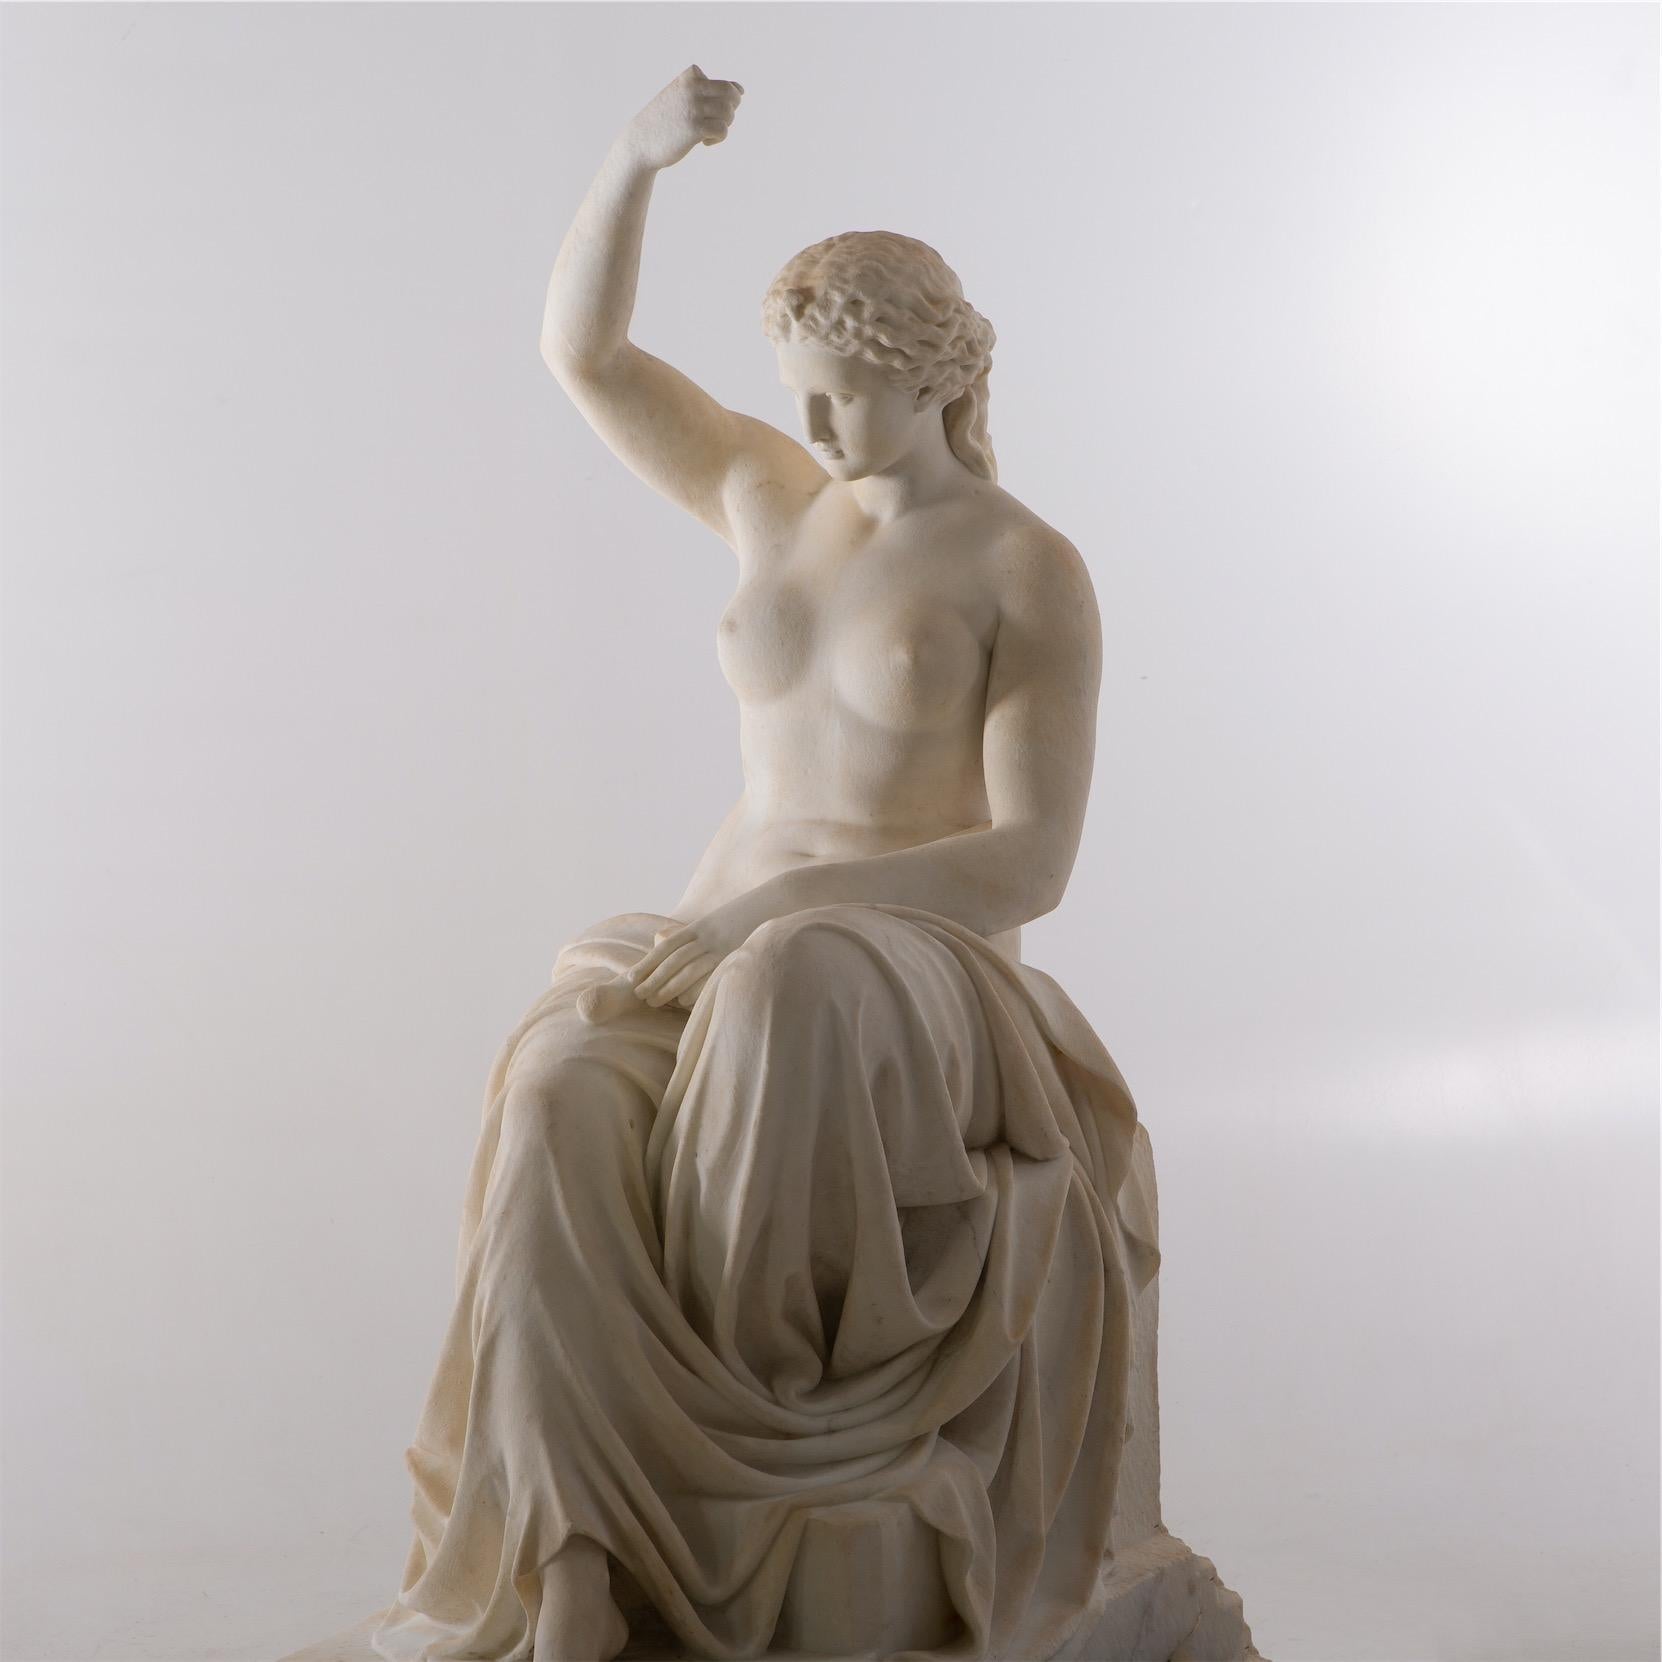 Italian Neoclassical Marble Sculpture of Eirene, Italy, Early 19th Century